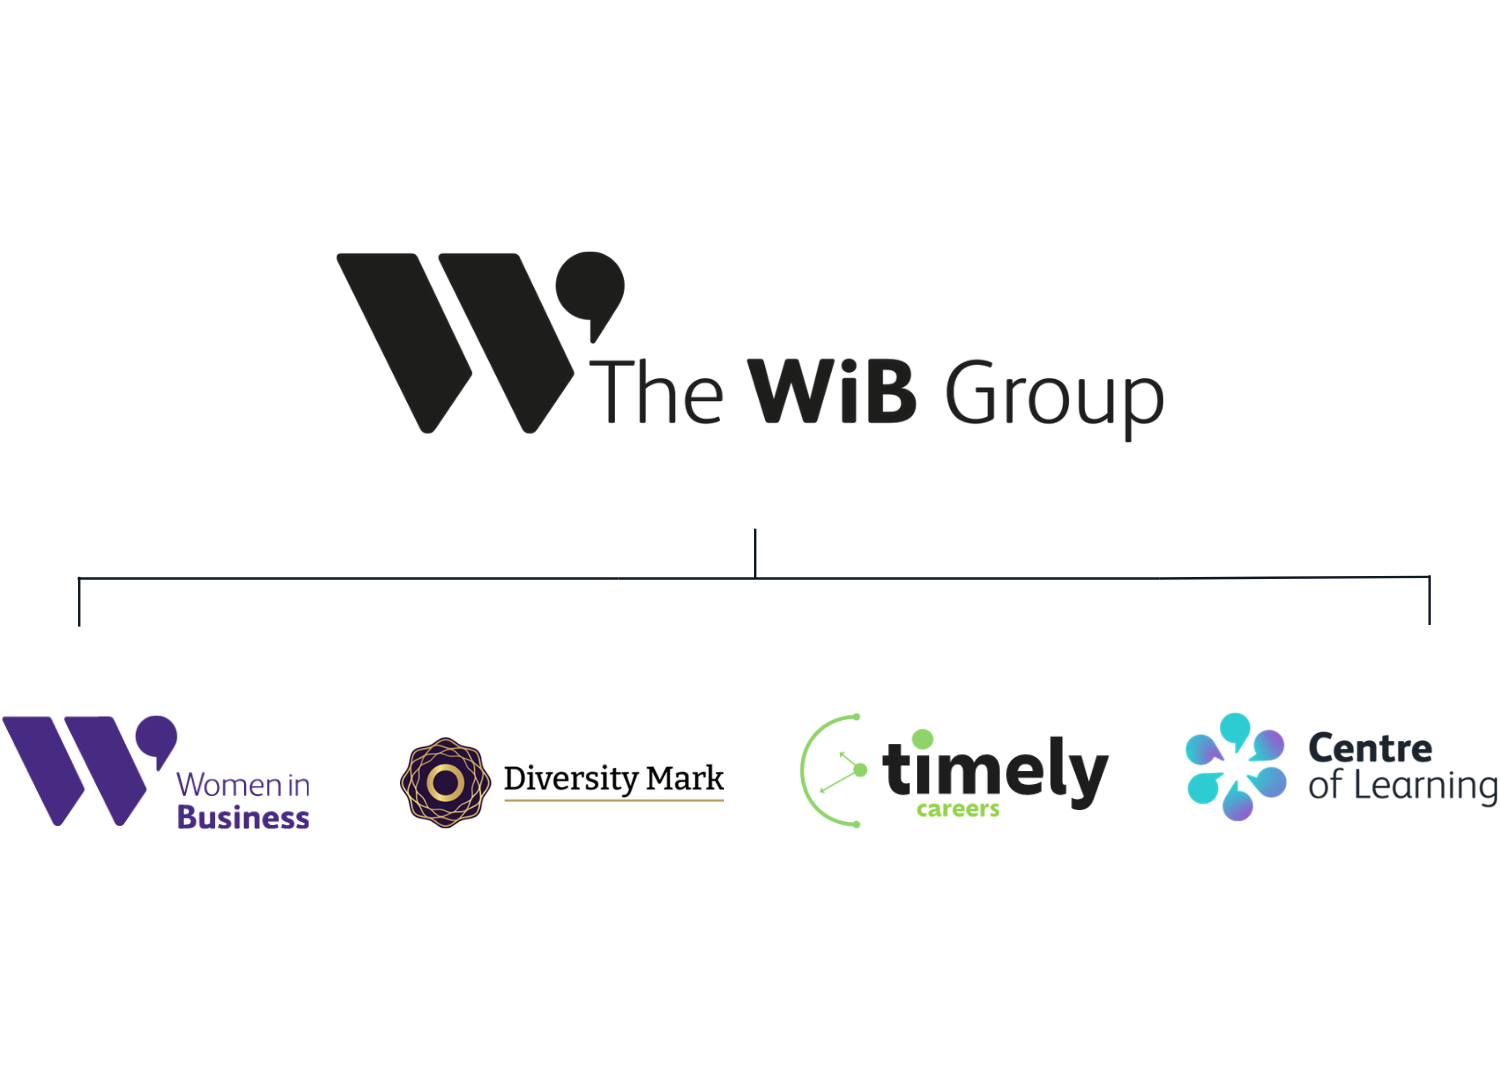 The WiB Group logo with 4 business unit logos below